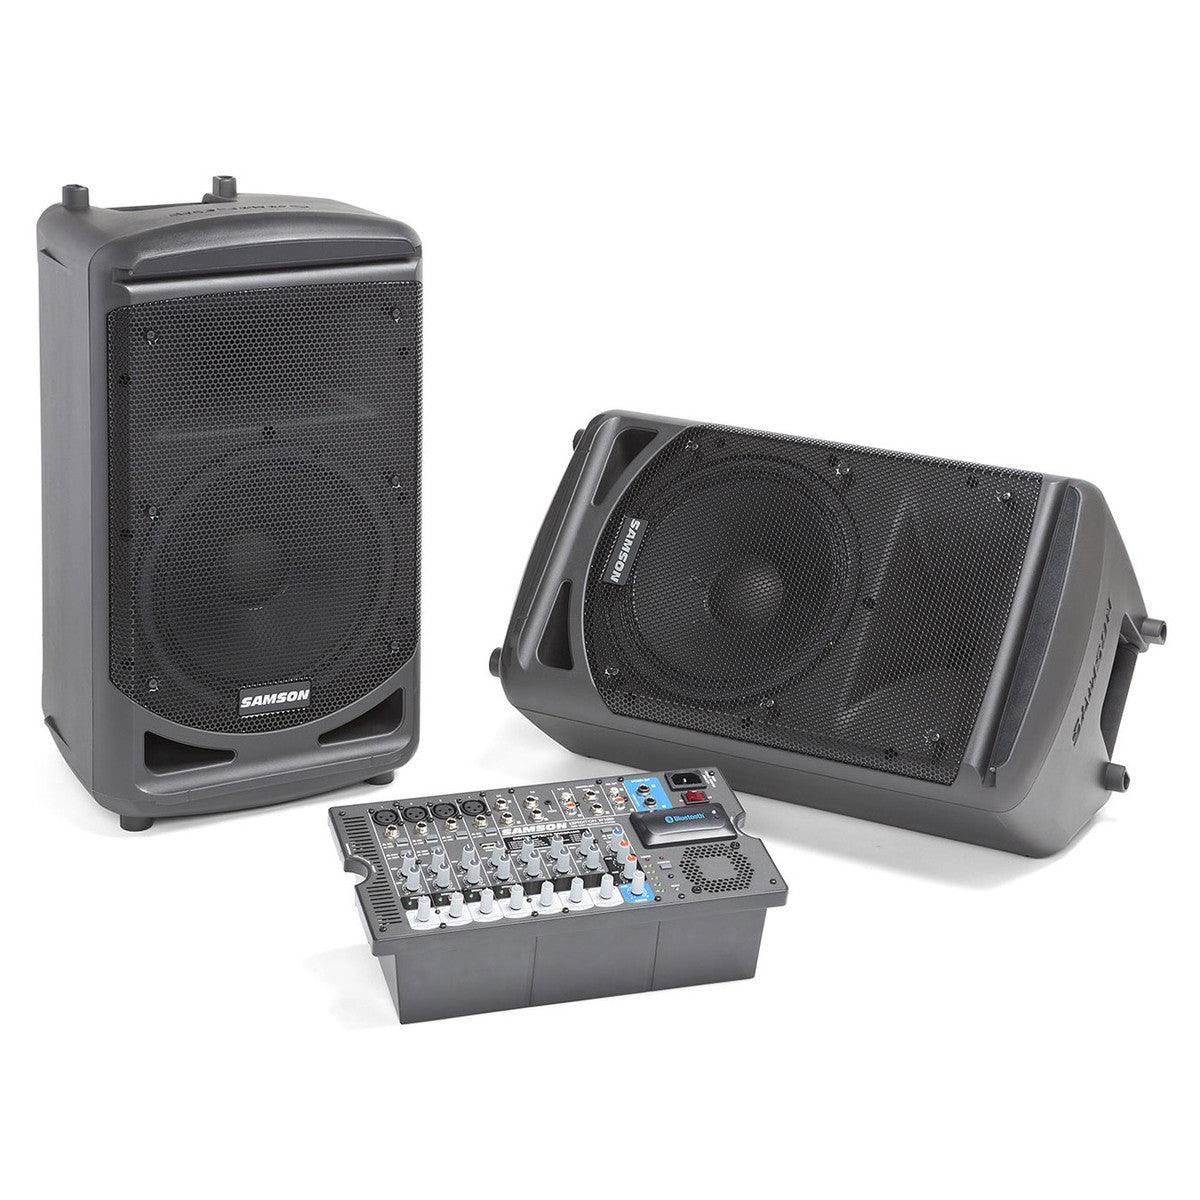 Samson Expedition XP1000 Portable PA system - DY Pro Audio